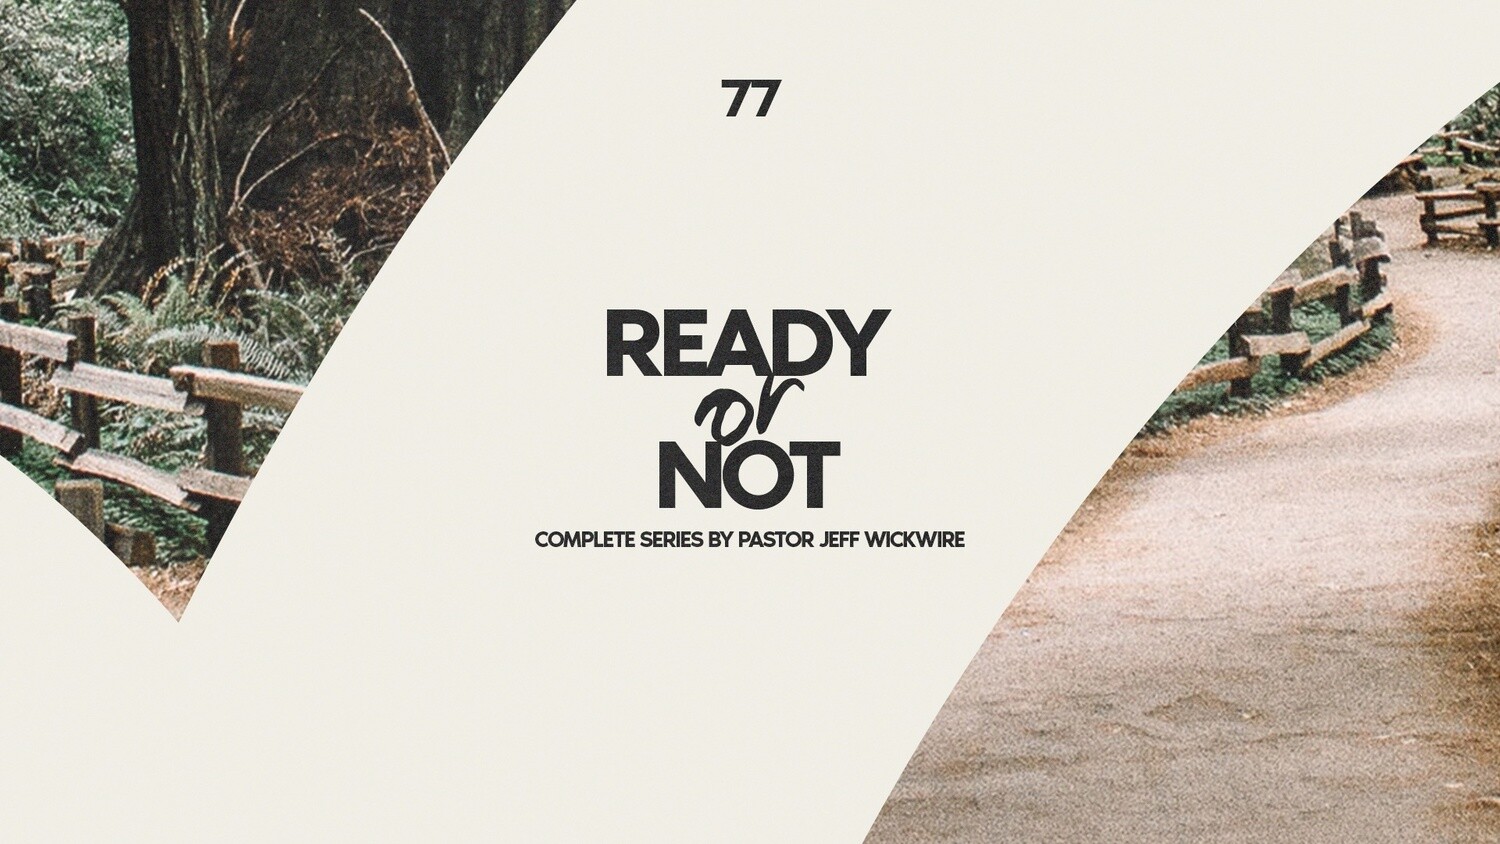 77 - Ready Or Not 2014 - Complete Series By Pastor Jeff Wickwire